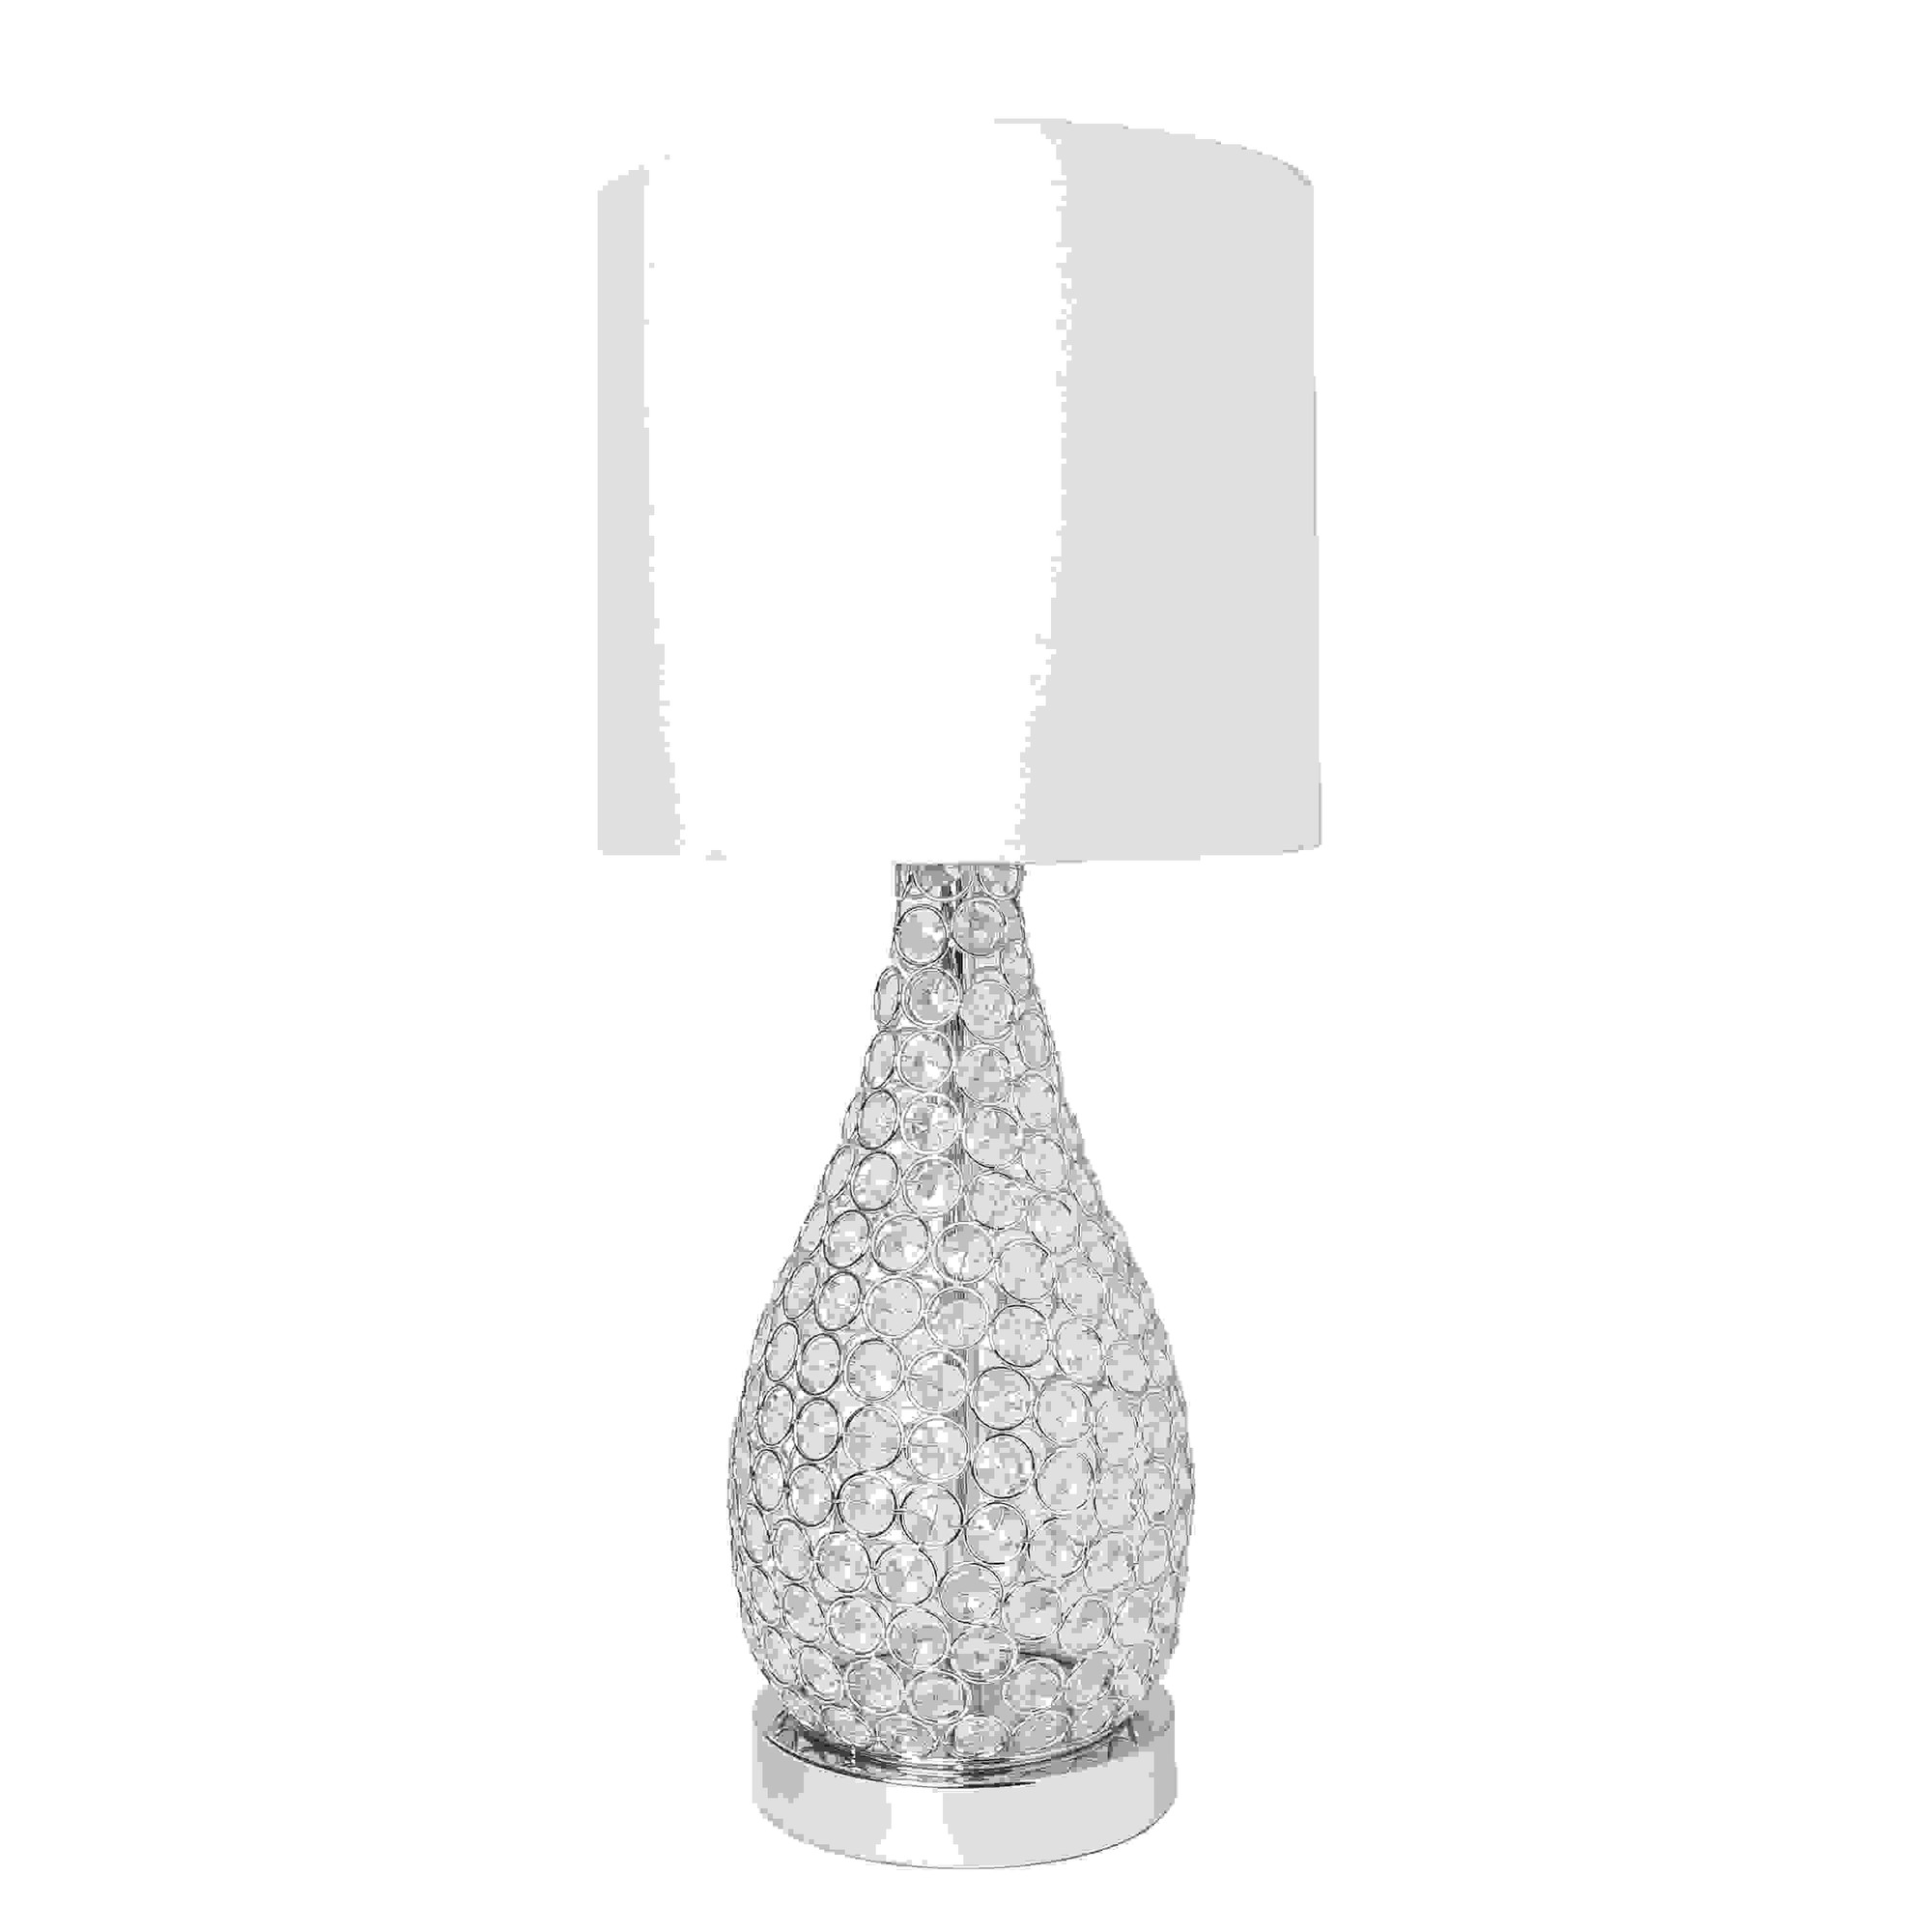 Elegant Designs Elipse Crystal Pinned Decorative Gourd Accent Table Lamp, Chrome